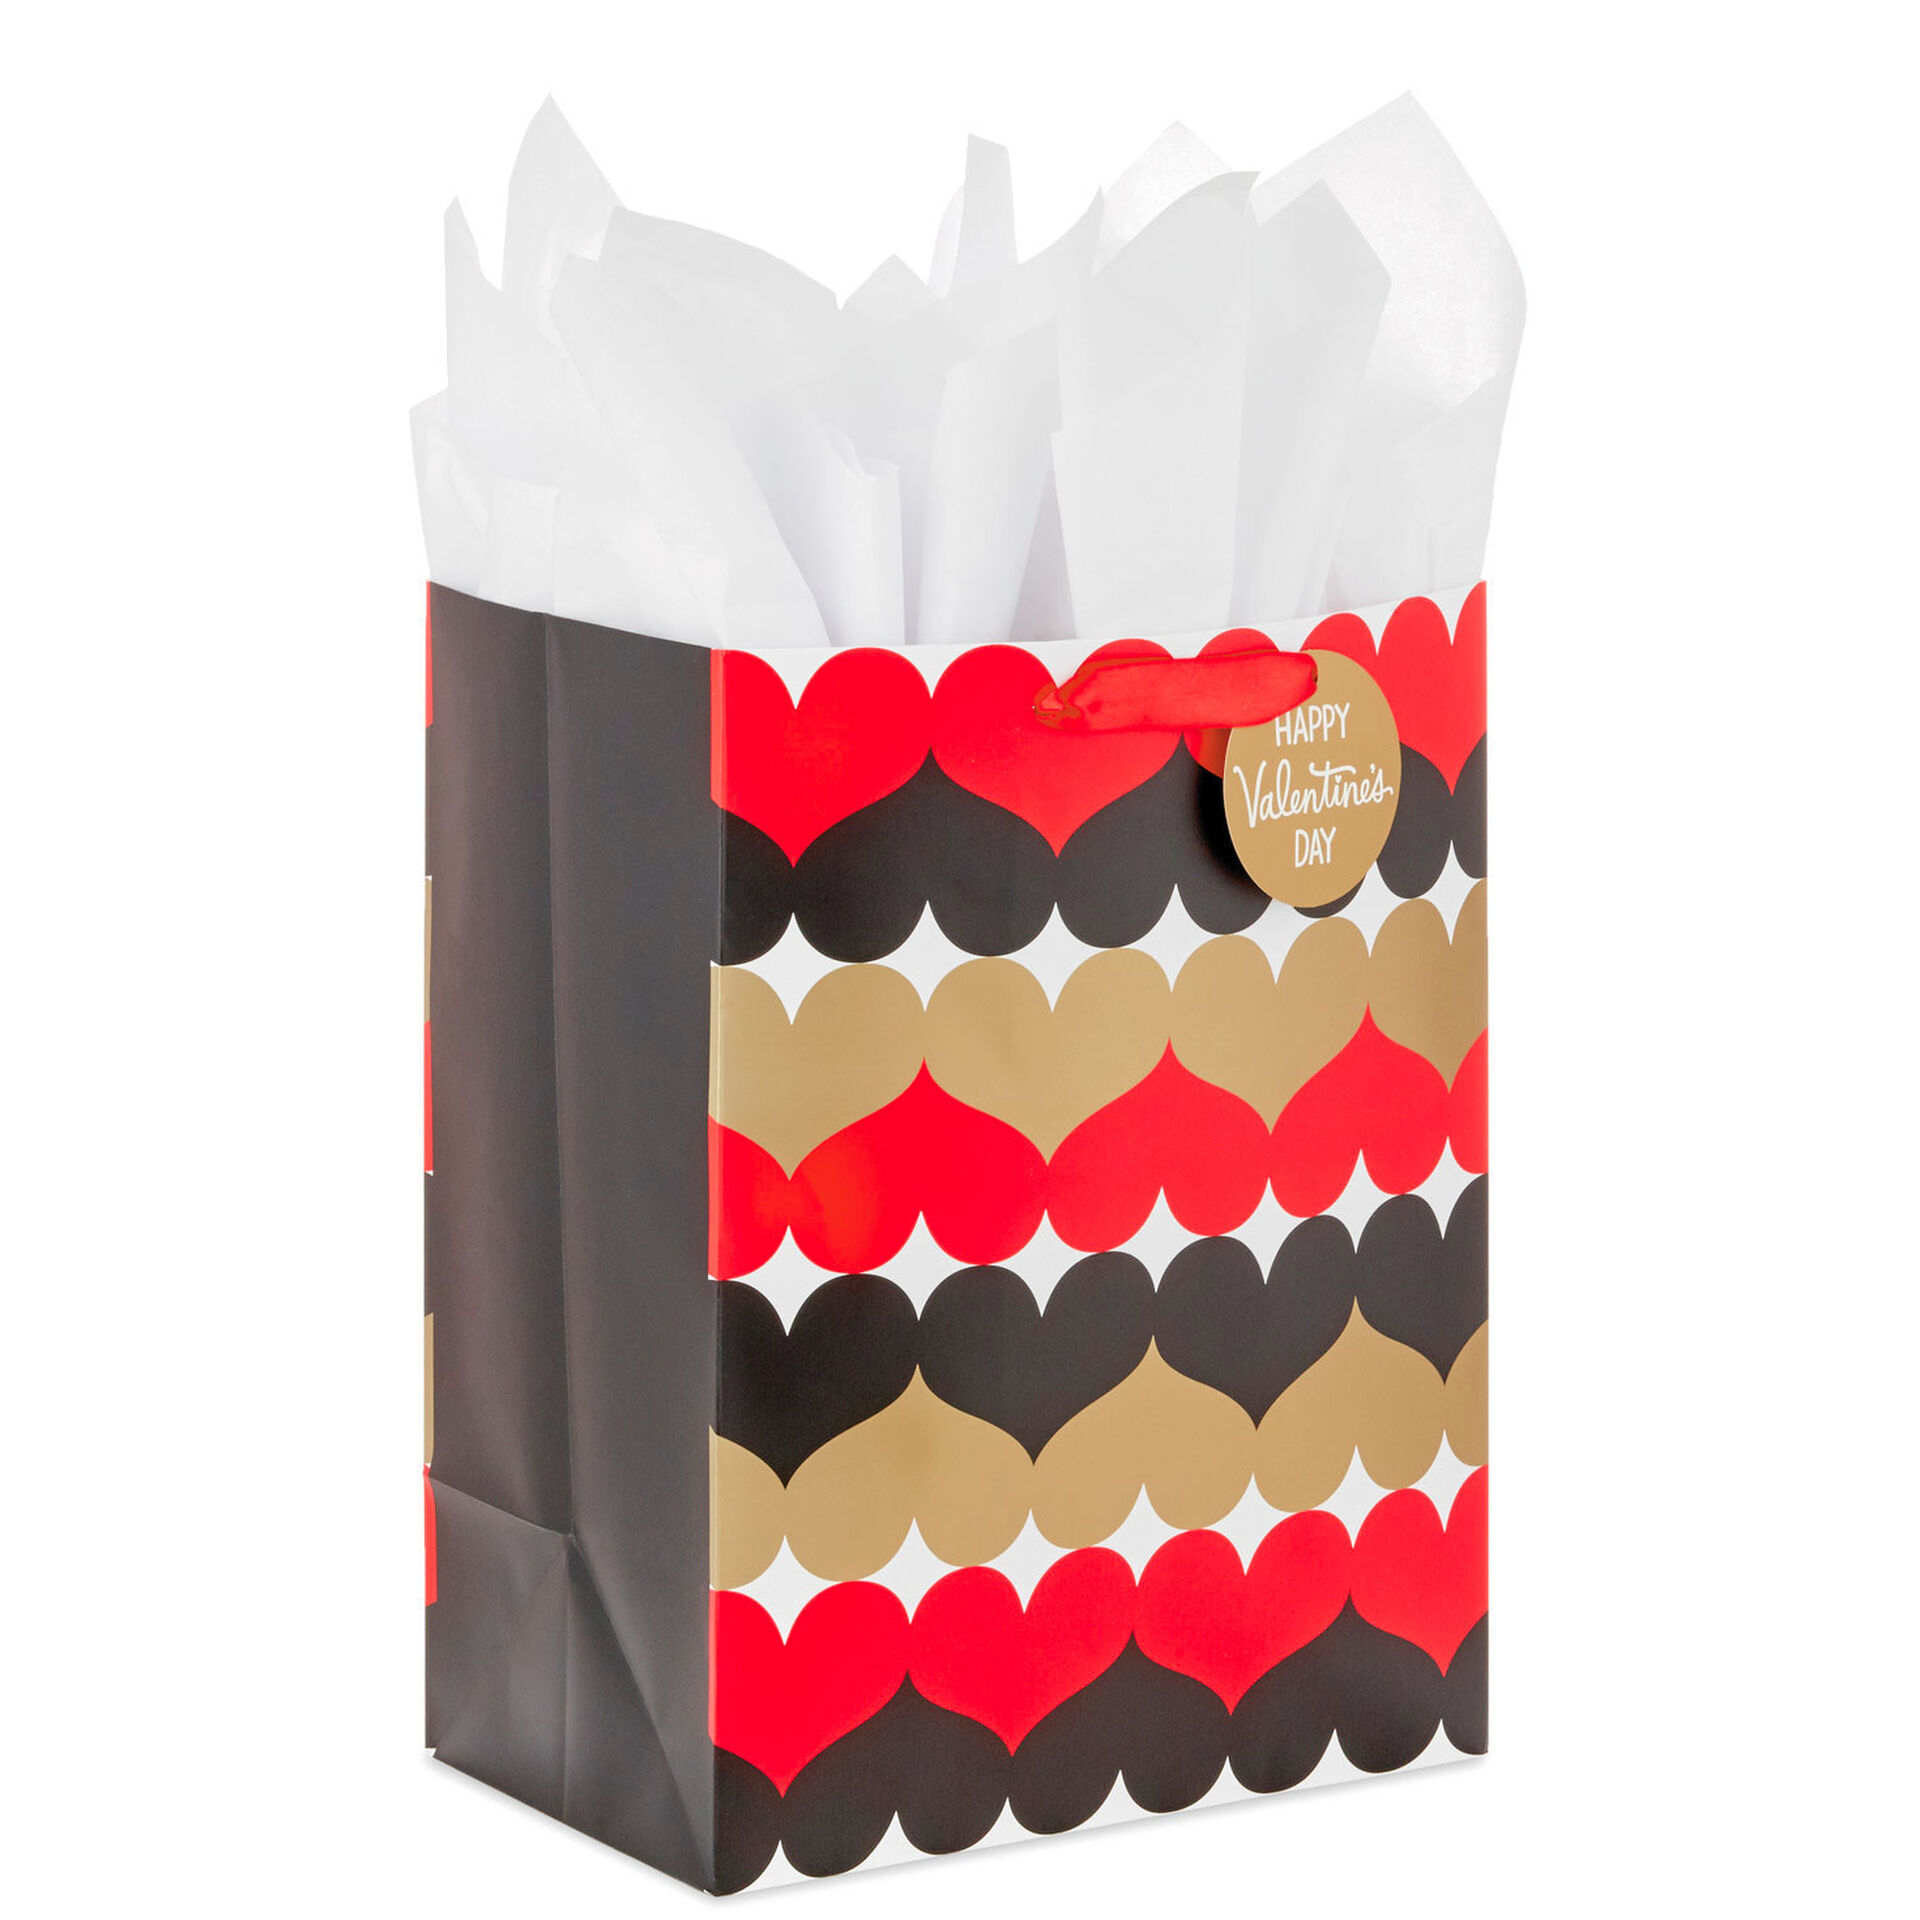 RED VALENTINES DAY GIFT BOXES AND x 2 TISSUE PAPER VALENTINE'S DAY